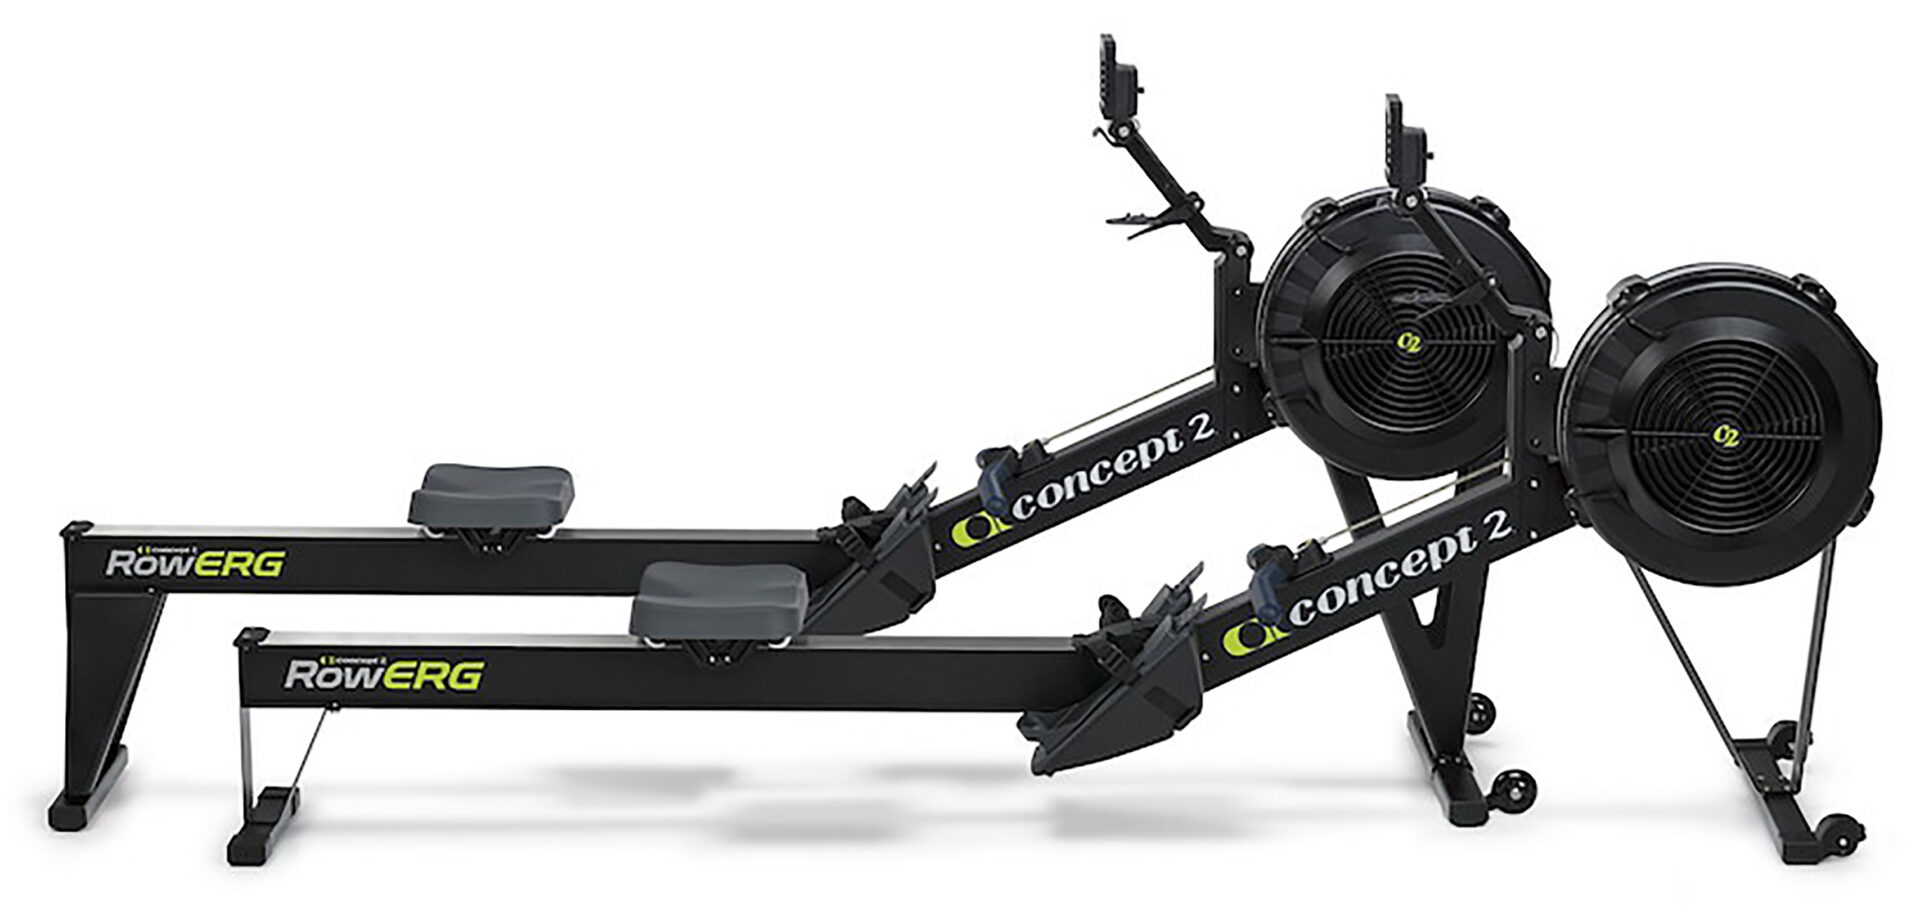 Two CV-ROWERG CONCEPT II ROWERS on a white background.